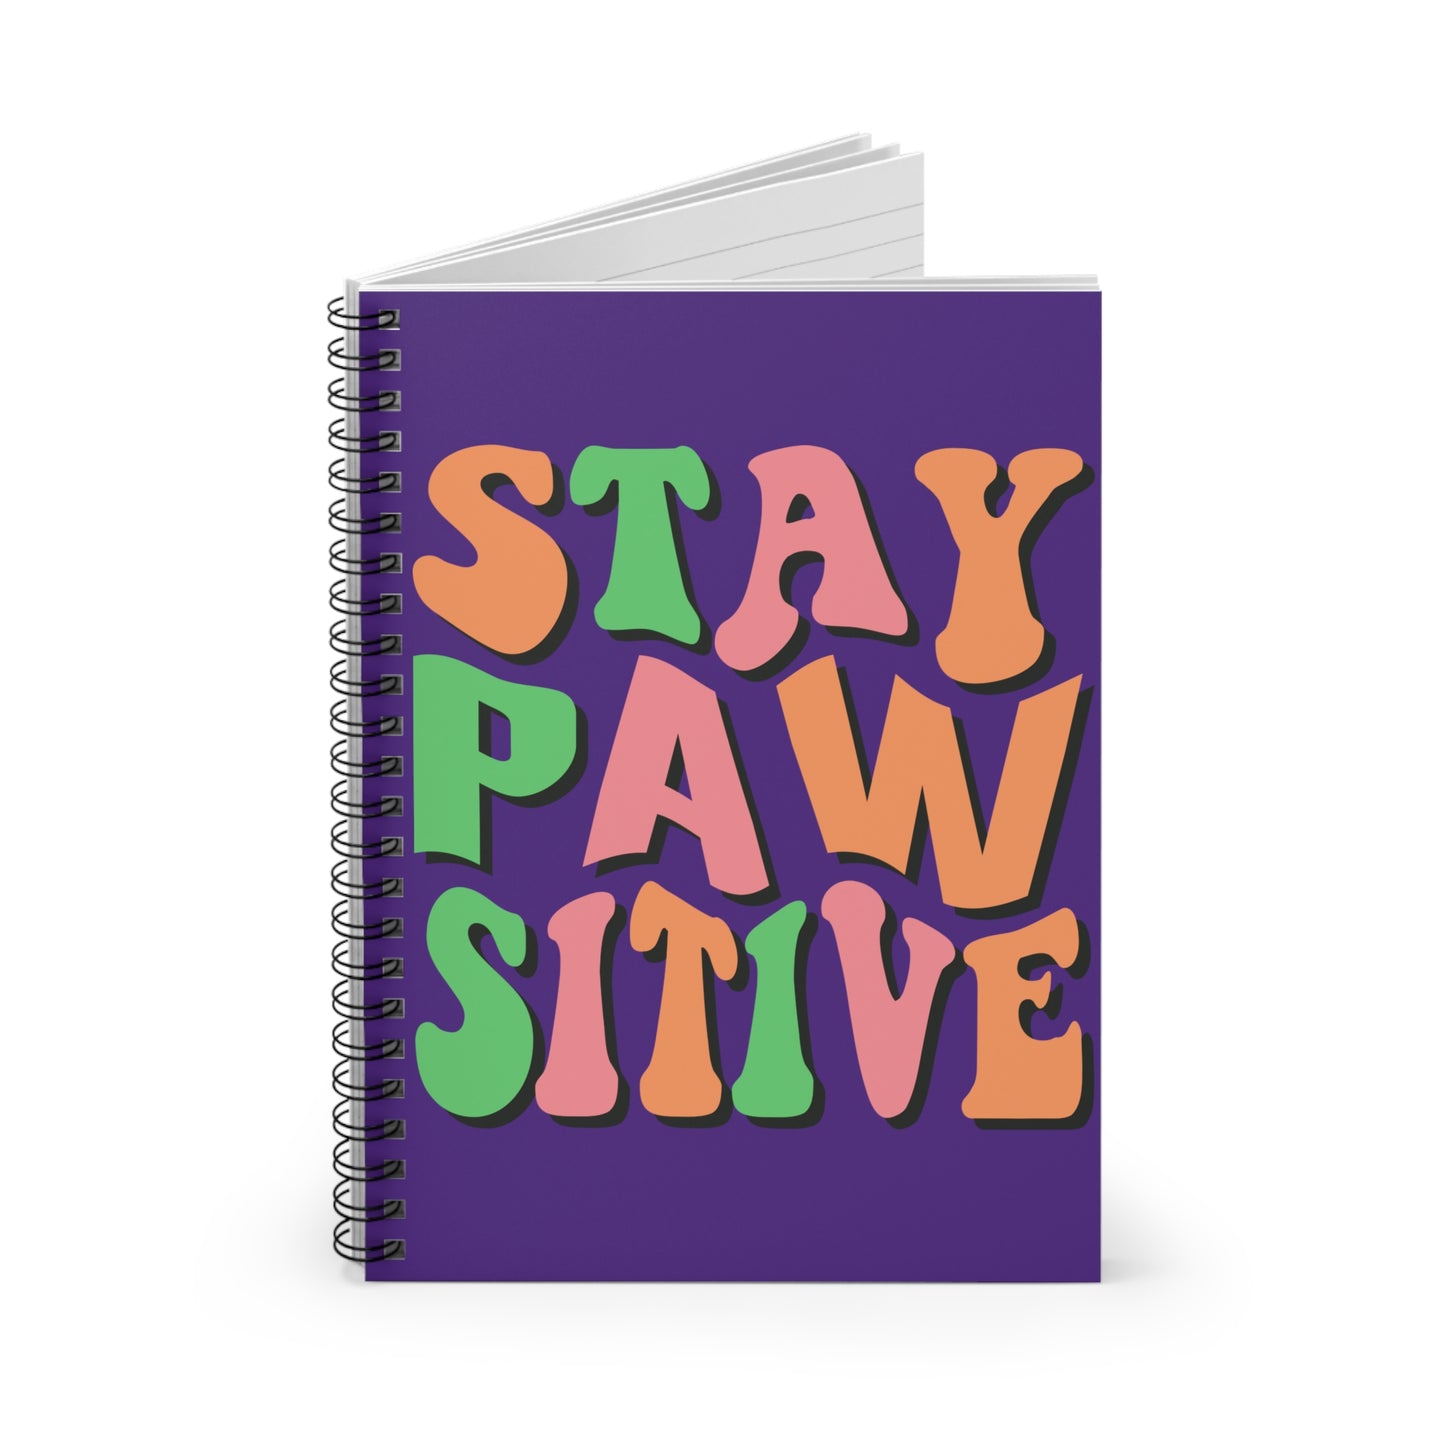 Stay Pawsitive: Spiral Notebook - Log Books - Journals - Diaries - and More Custom Printed by TheGlassyLass.com